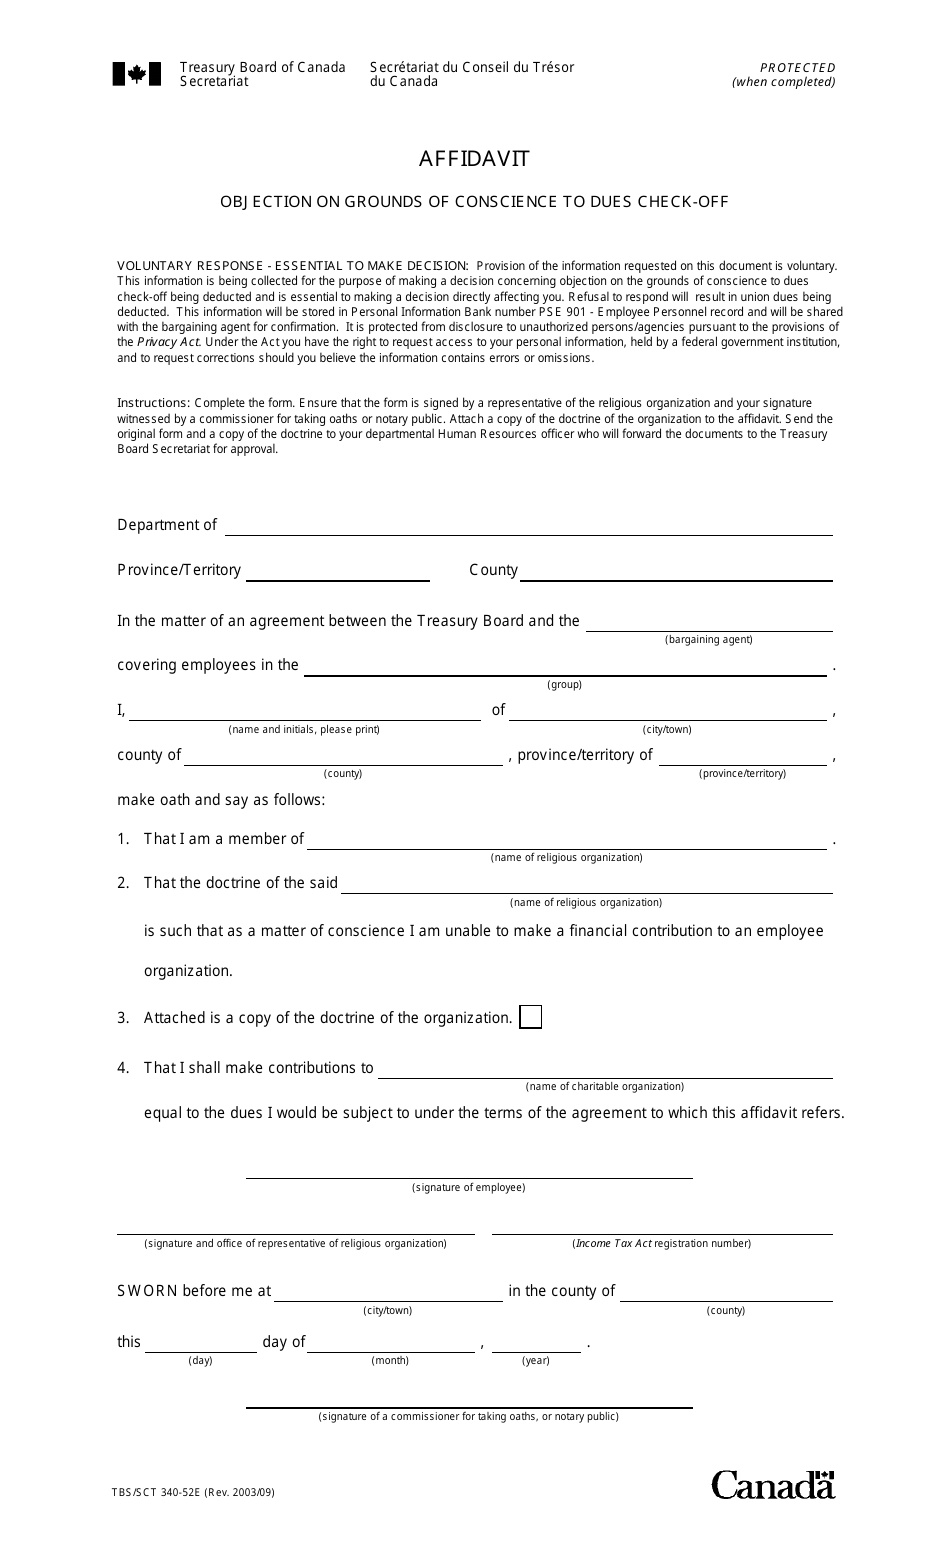 Form TBS / SCT340-52 Affidavit - Objection on Grounds of Conscience to Dues Check-Off - Canada, Page 1